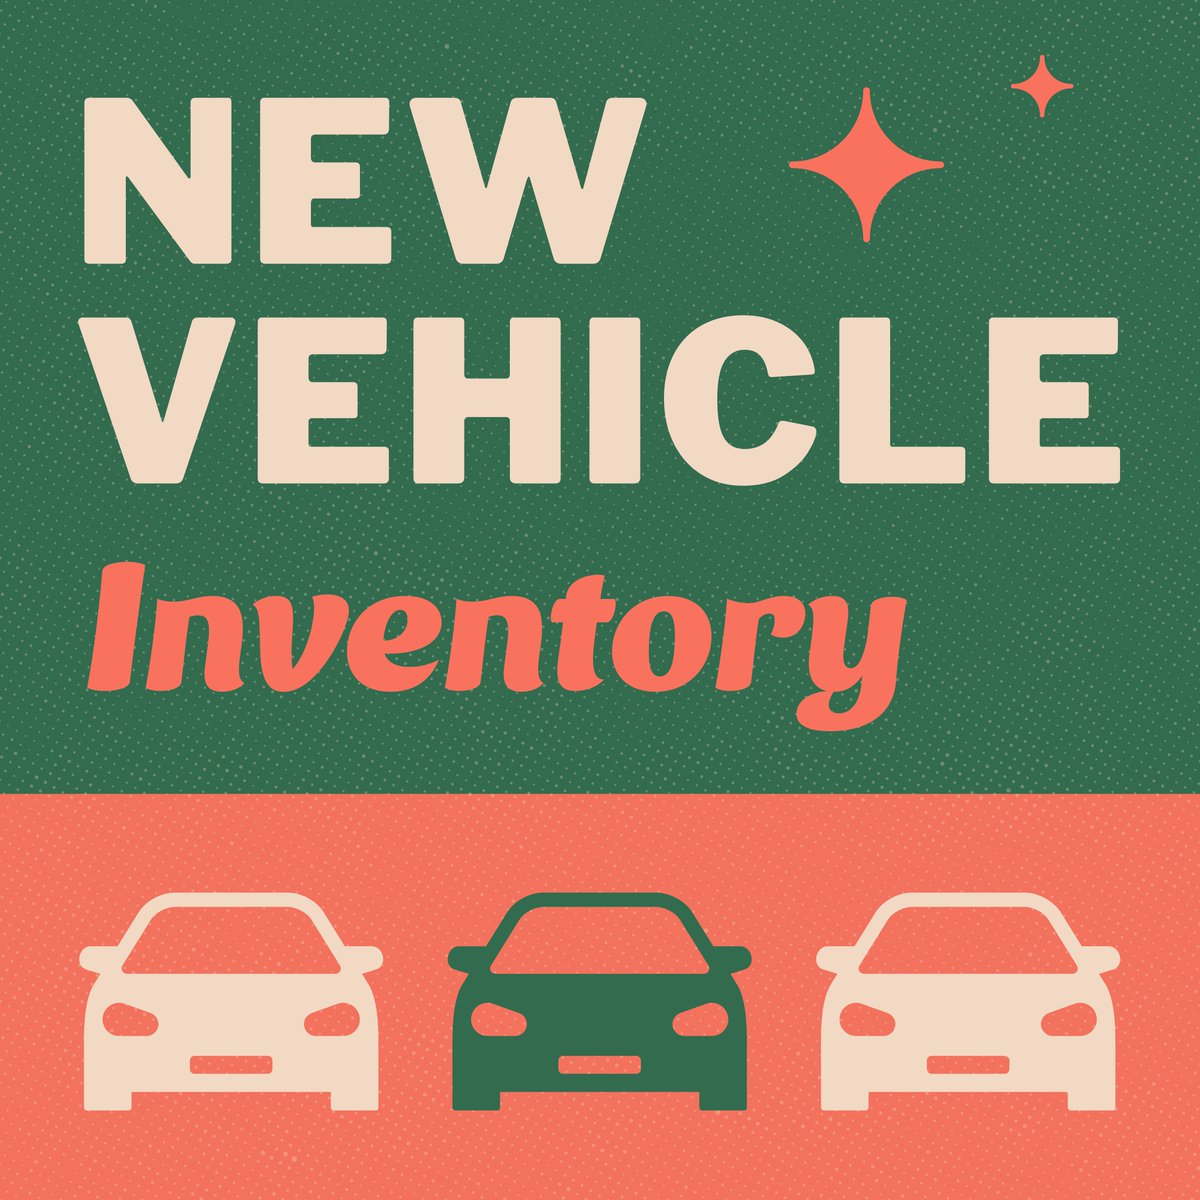 Hot off the assembly line! Check out our stunning new vehicles! 🚗💨. Luxurious, reliable, and oh-so-shiny! ✨ Explore the endless possibilities of adventure and comfort today. #NewVehicles Shop now: ow.ly/PQyF50RpbGv